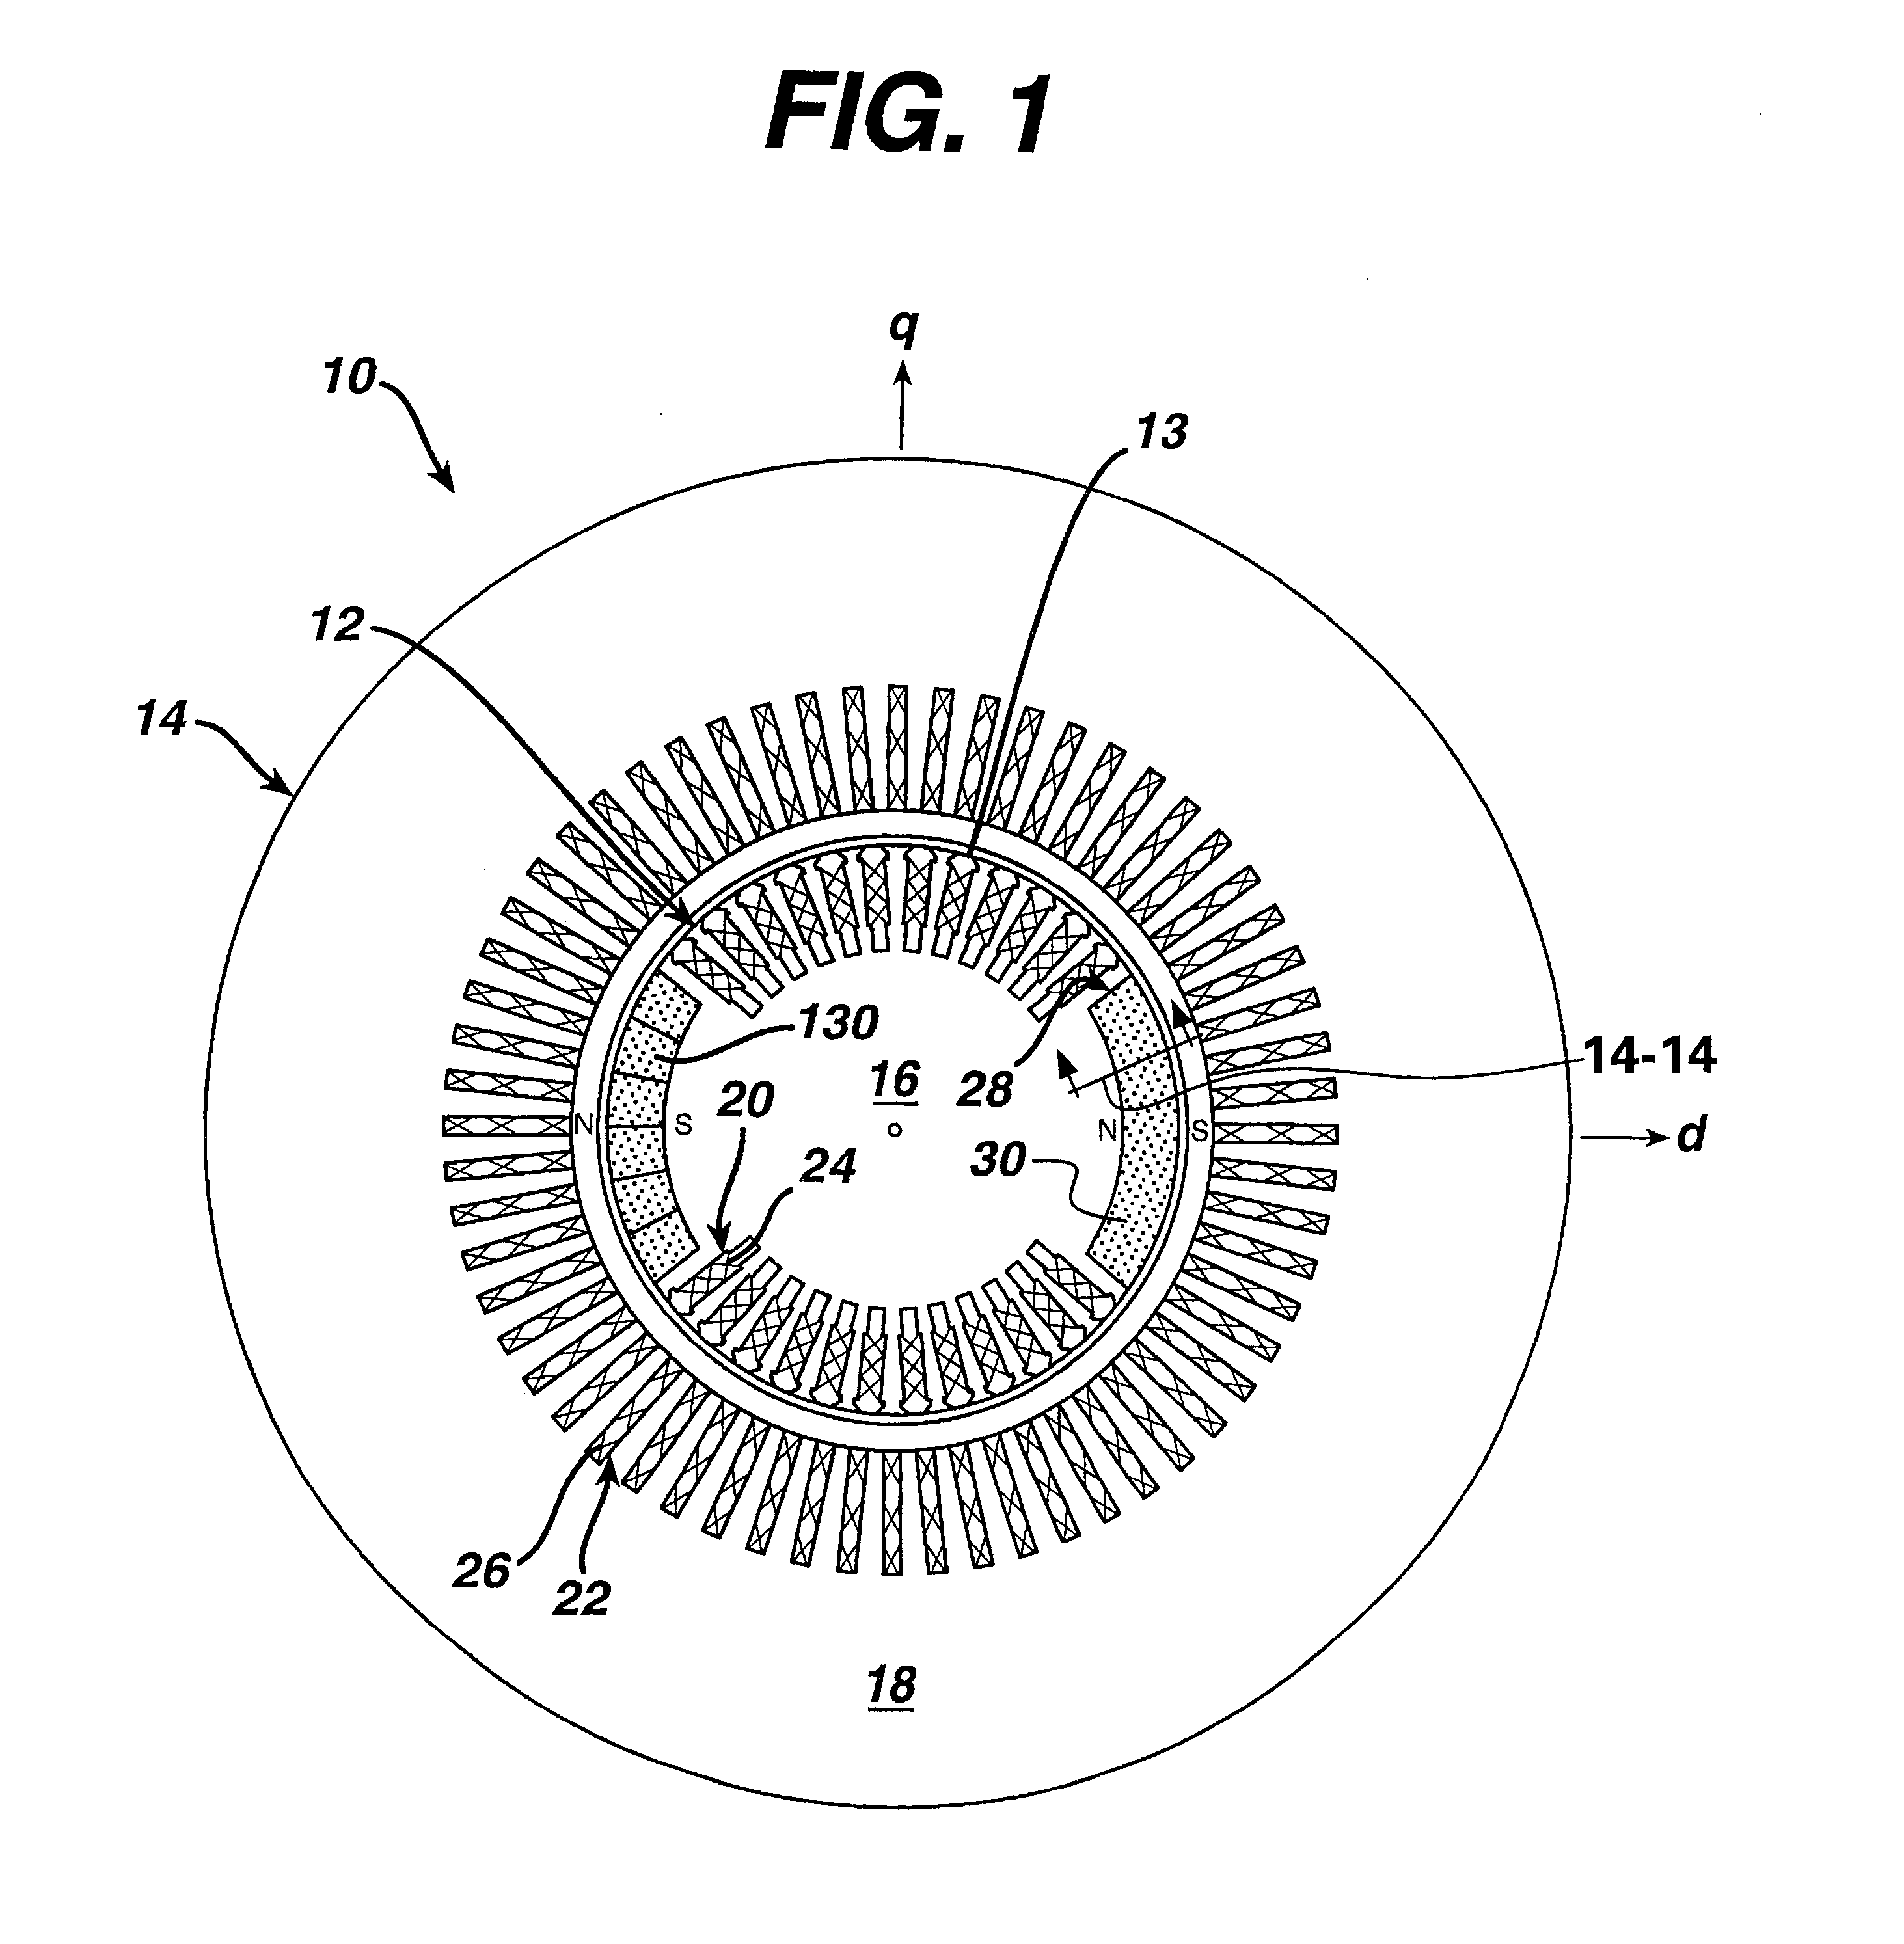 Hybrid synchronous machines comprising permanent magnets and excitation windings in cylindrical element slots